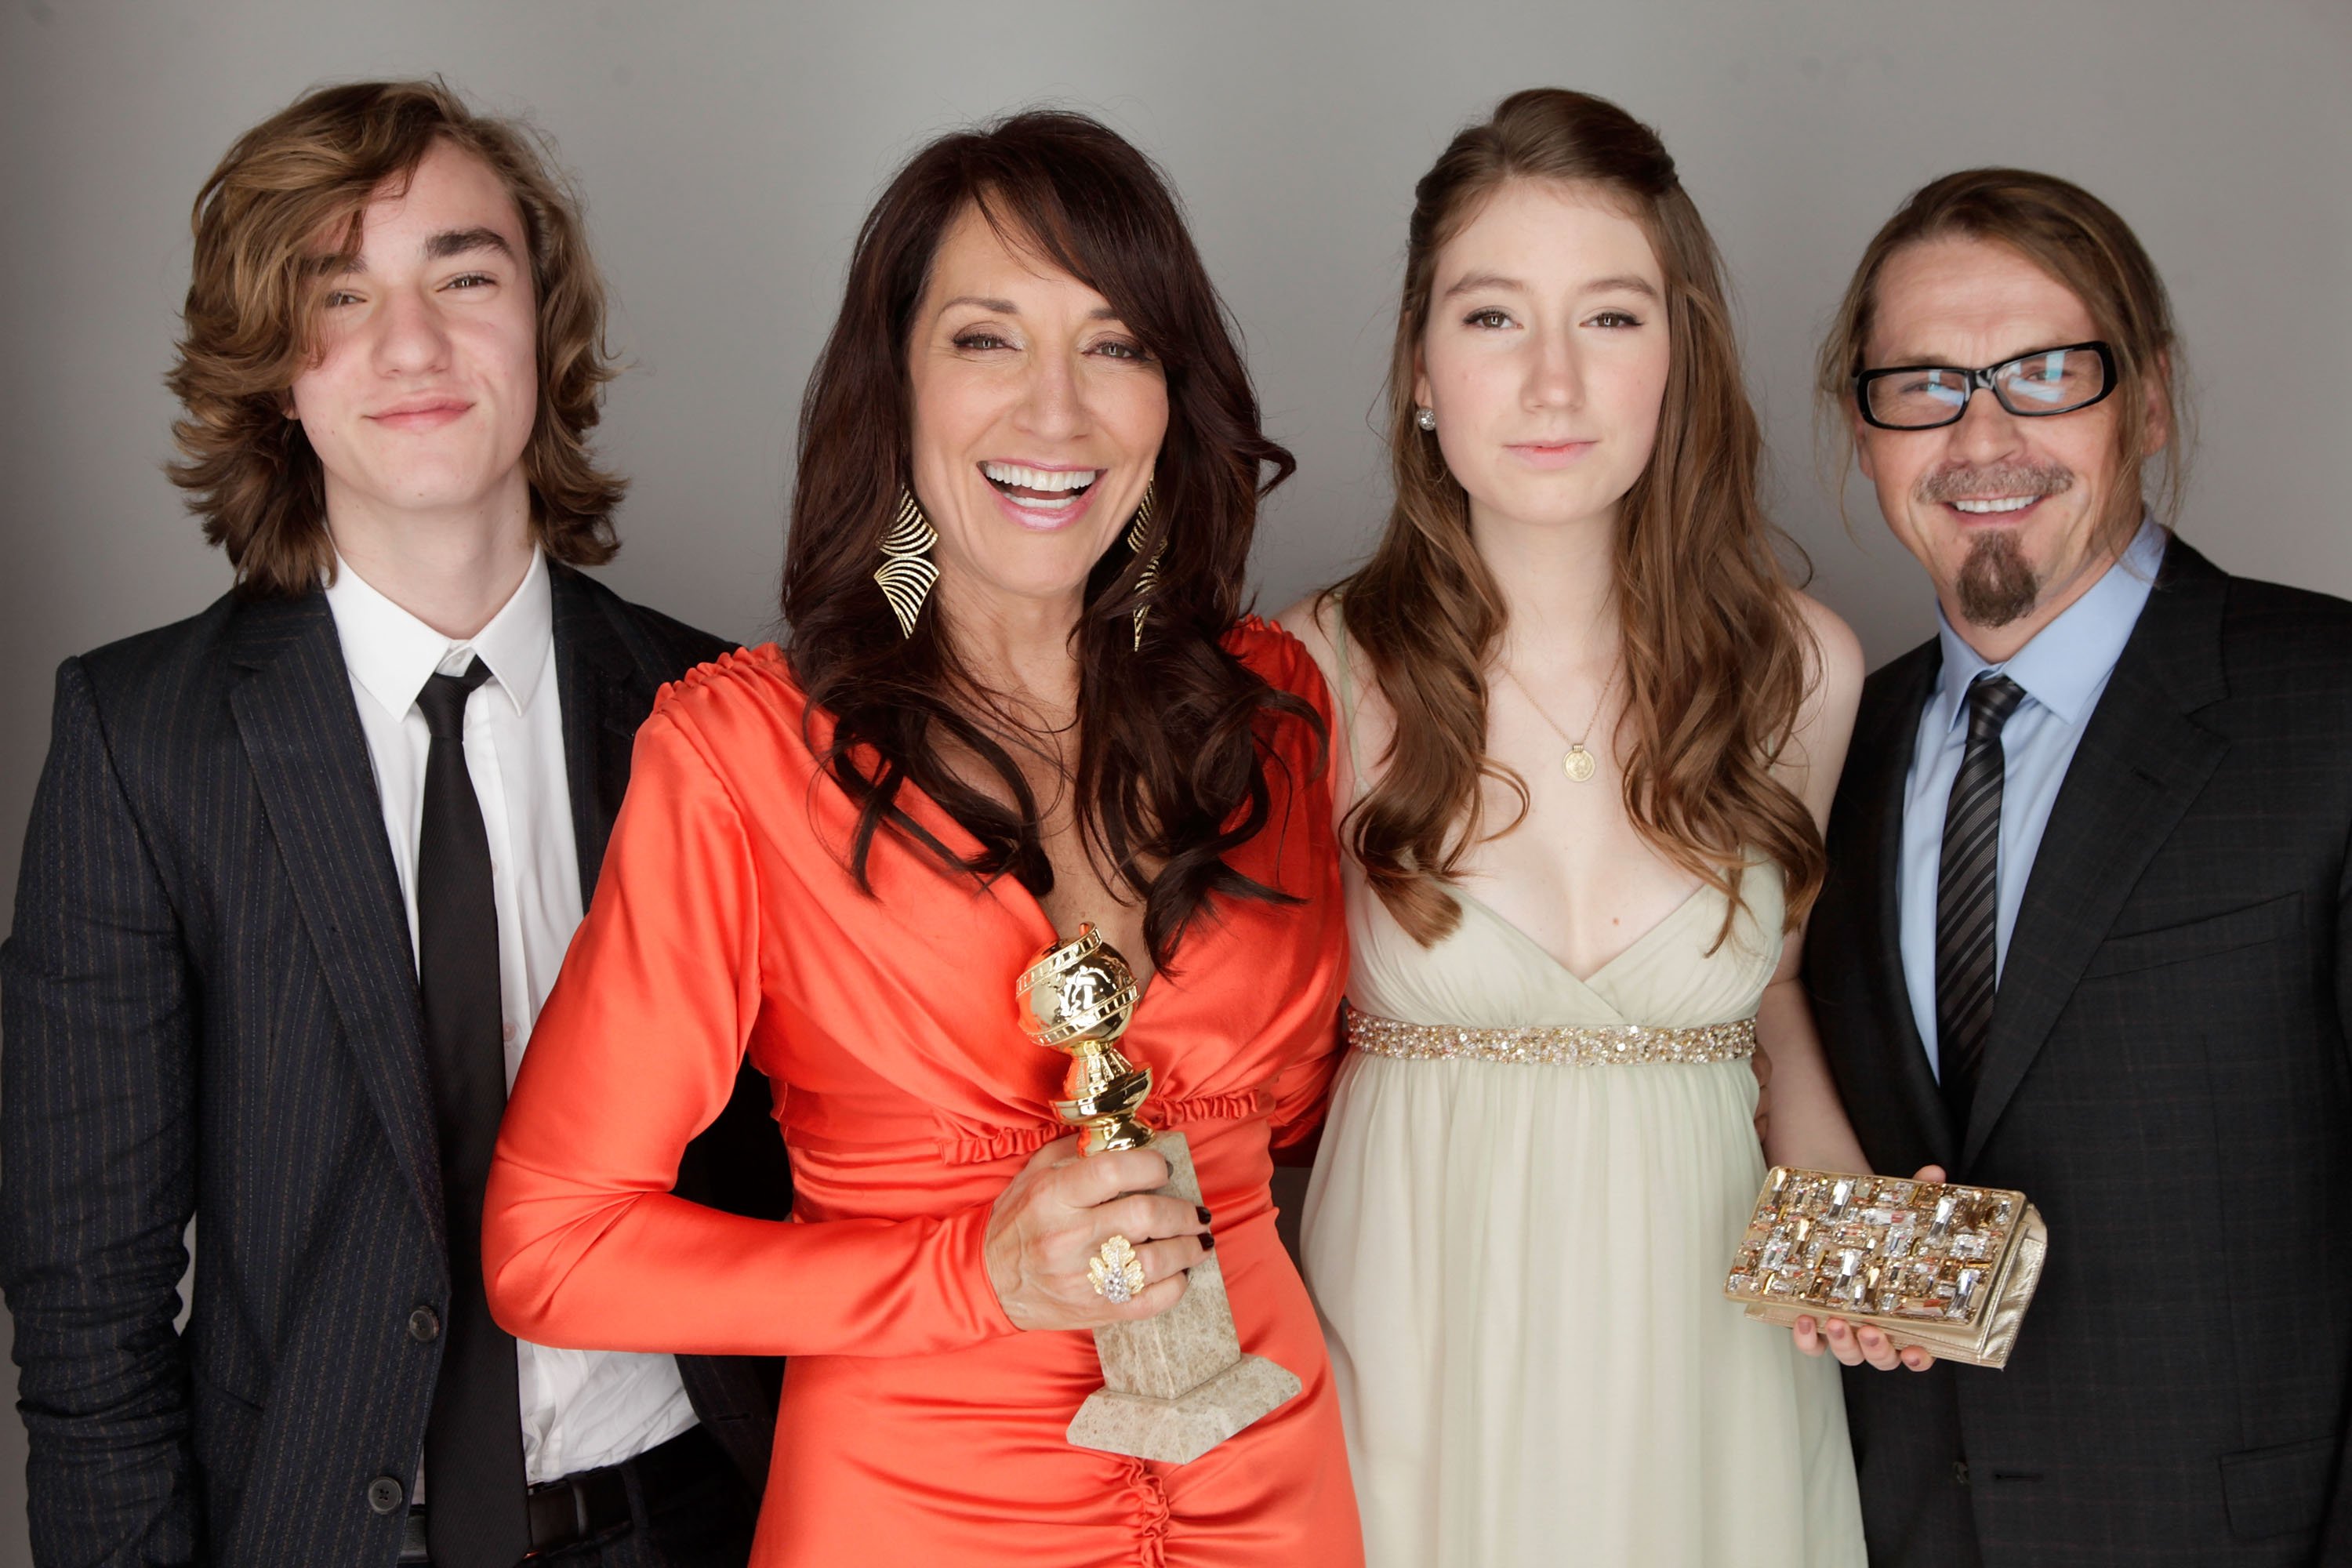 Katey Sagal, winner of the Best Performance In A Television Series - Drama for "Sons of Anarchy" poses for a portrait backstage with son James White, daughter Sarah Grace White and husband writer/director Kurt Sutter at the 68th Annual Golden Globe Awards held at The Beverly Hilton hotel on January 16, 2011 in Beverly Hills, California | Photo: Getty Images